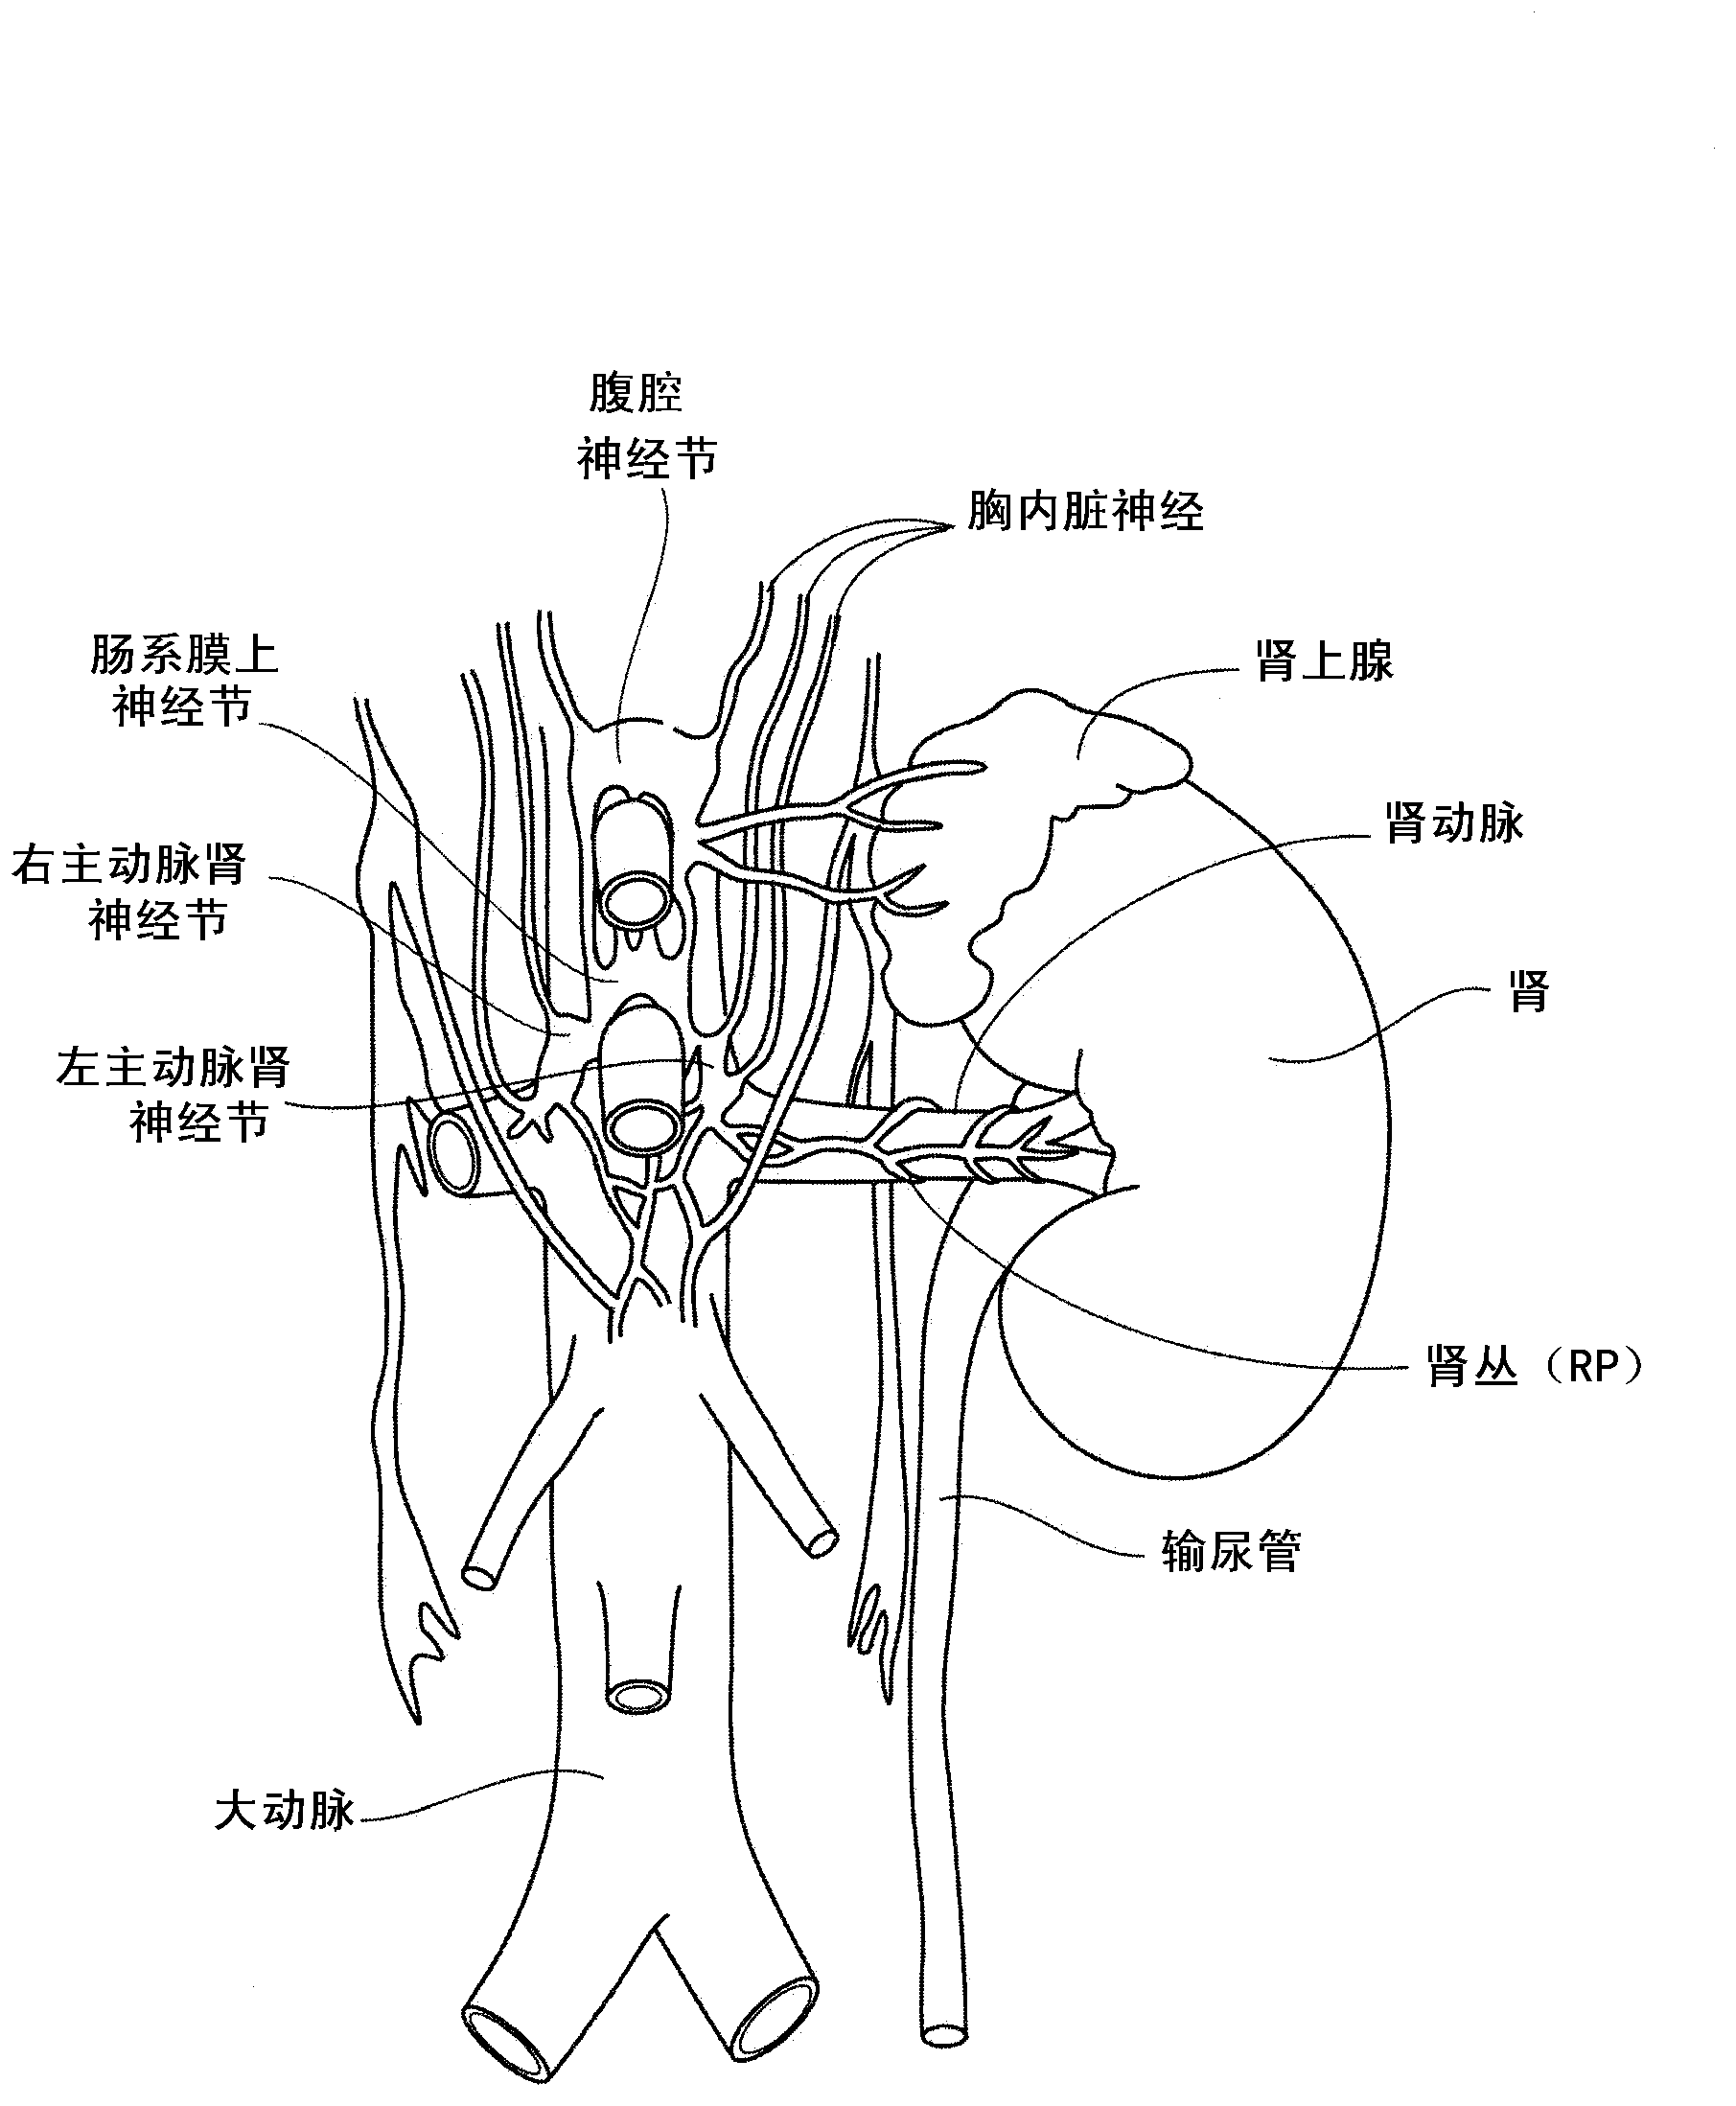 Methods and apparatus for renal neuromodulation via stereotactic radiotherapy